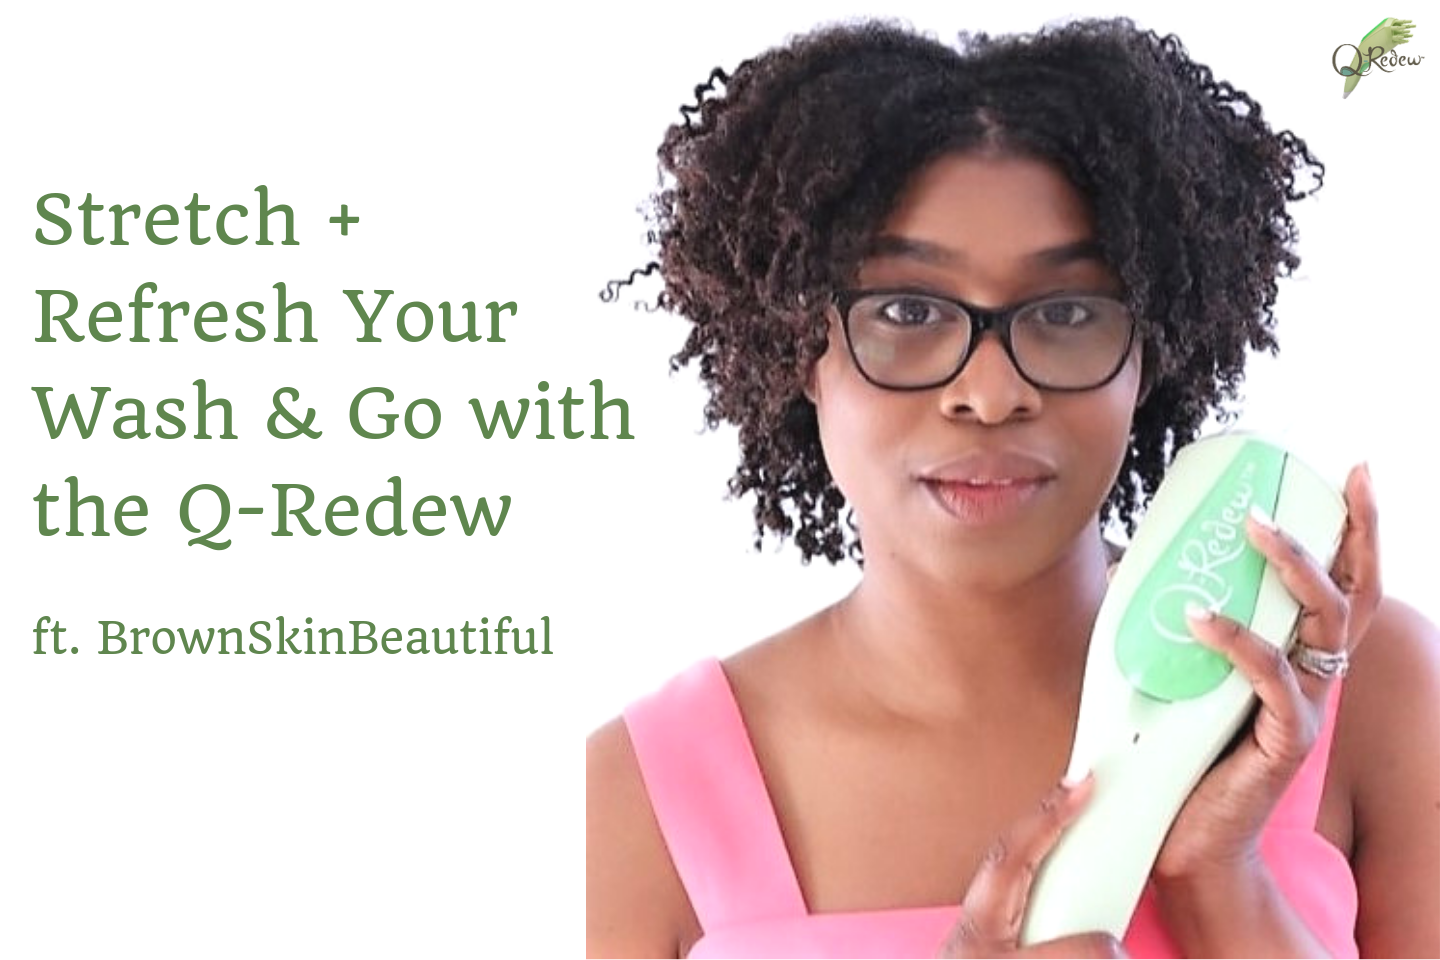 Stretch & Refresh Your Wash & Go With the Q-Redew!